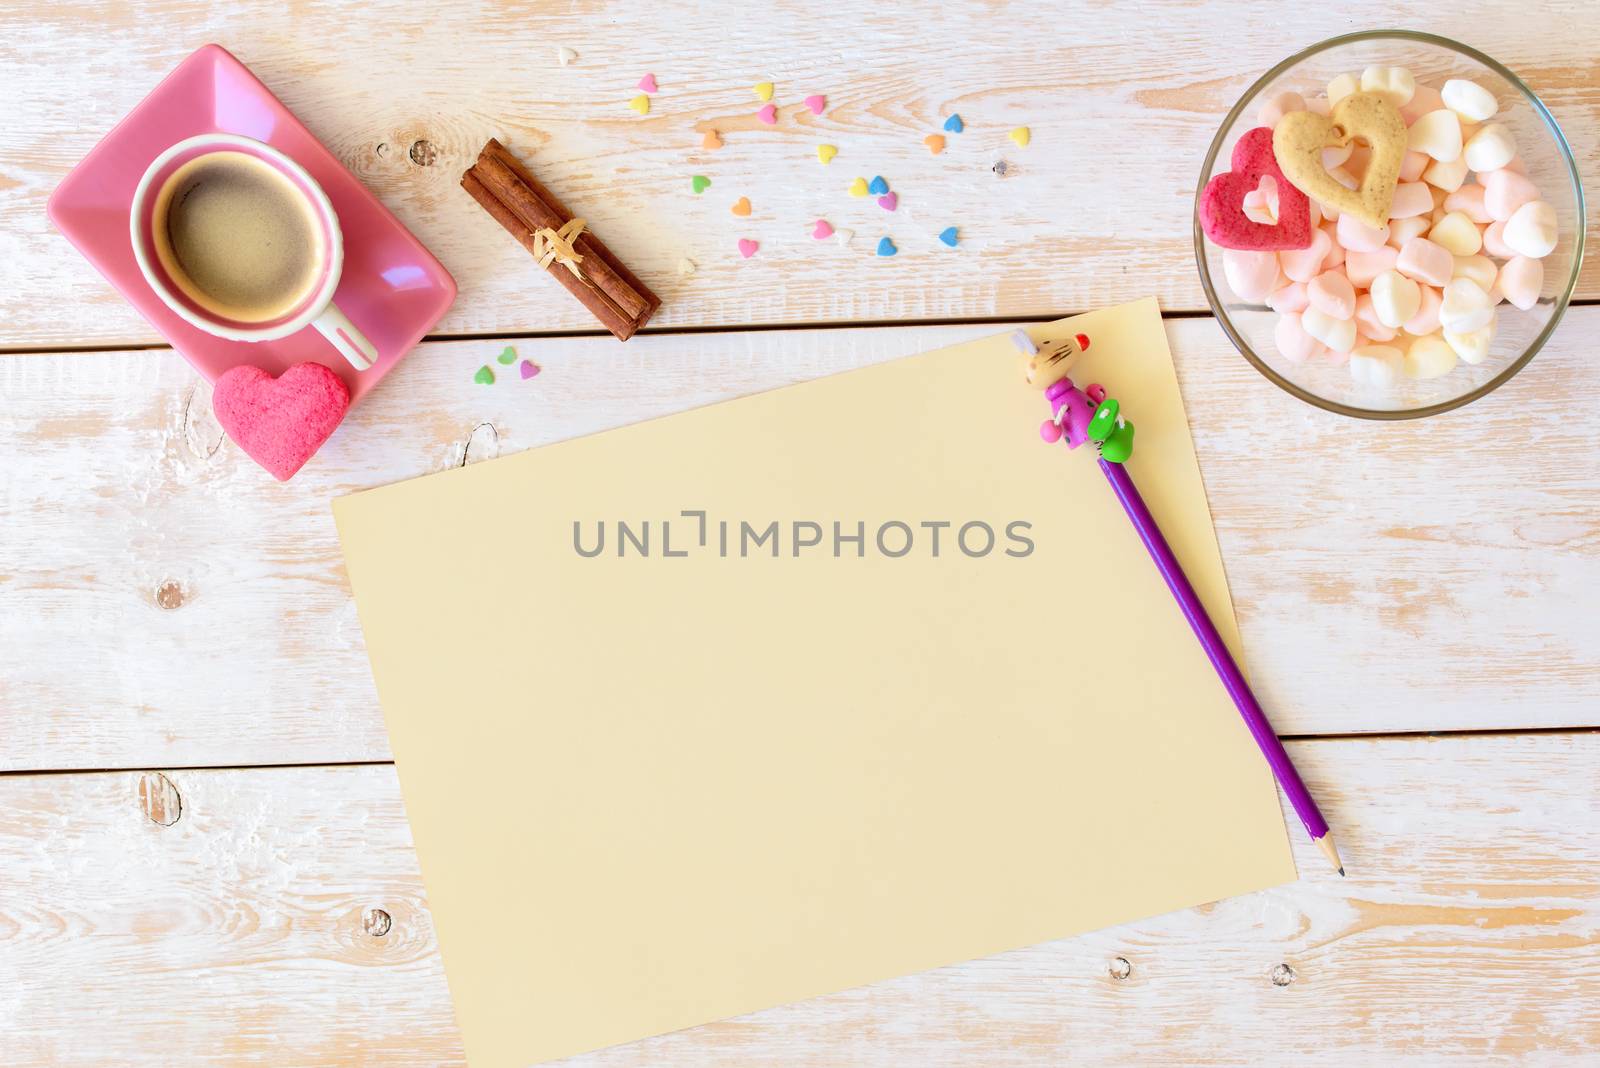 Blank paper on table. Blank sheet of paper, coffee cup, cookie, pencil on wood background. Design mockup